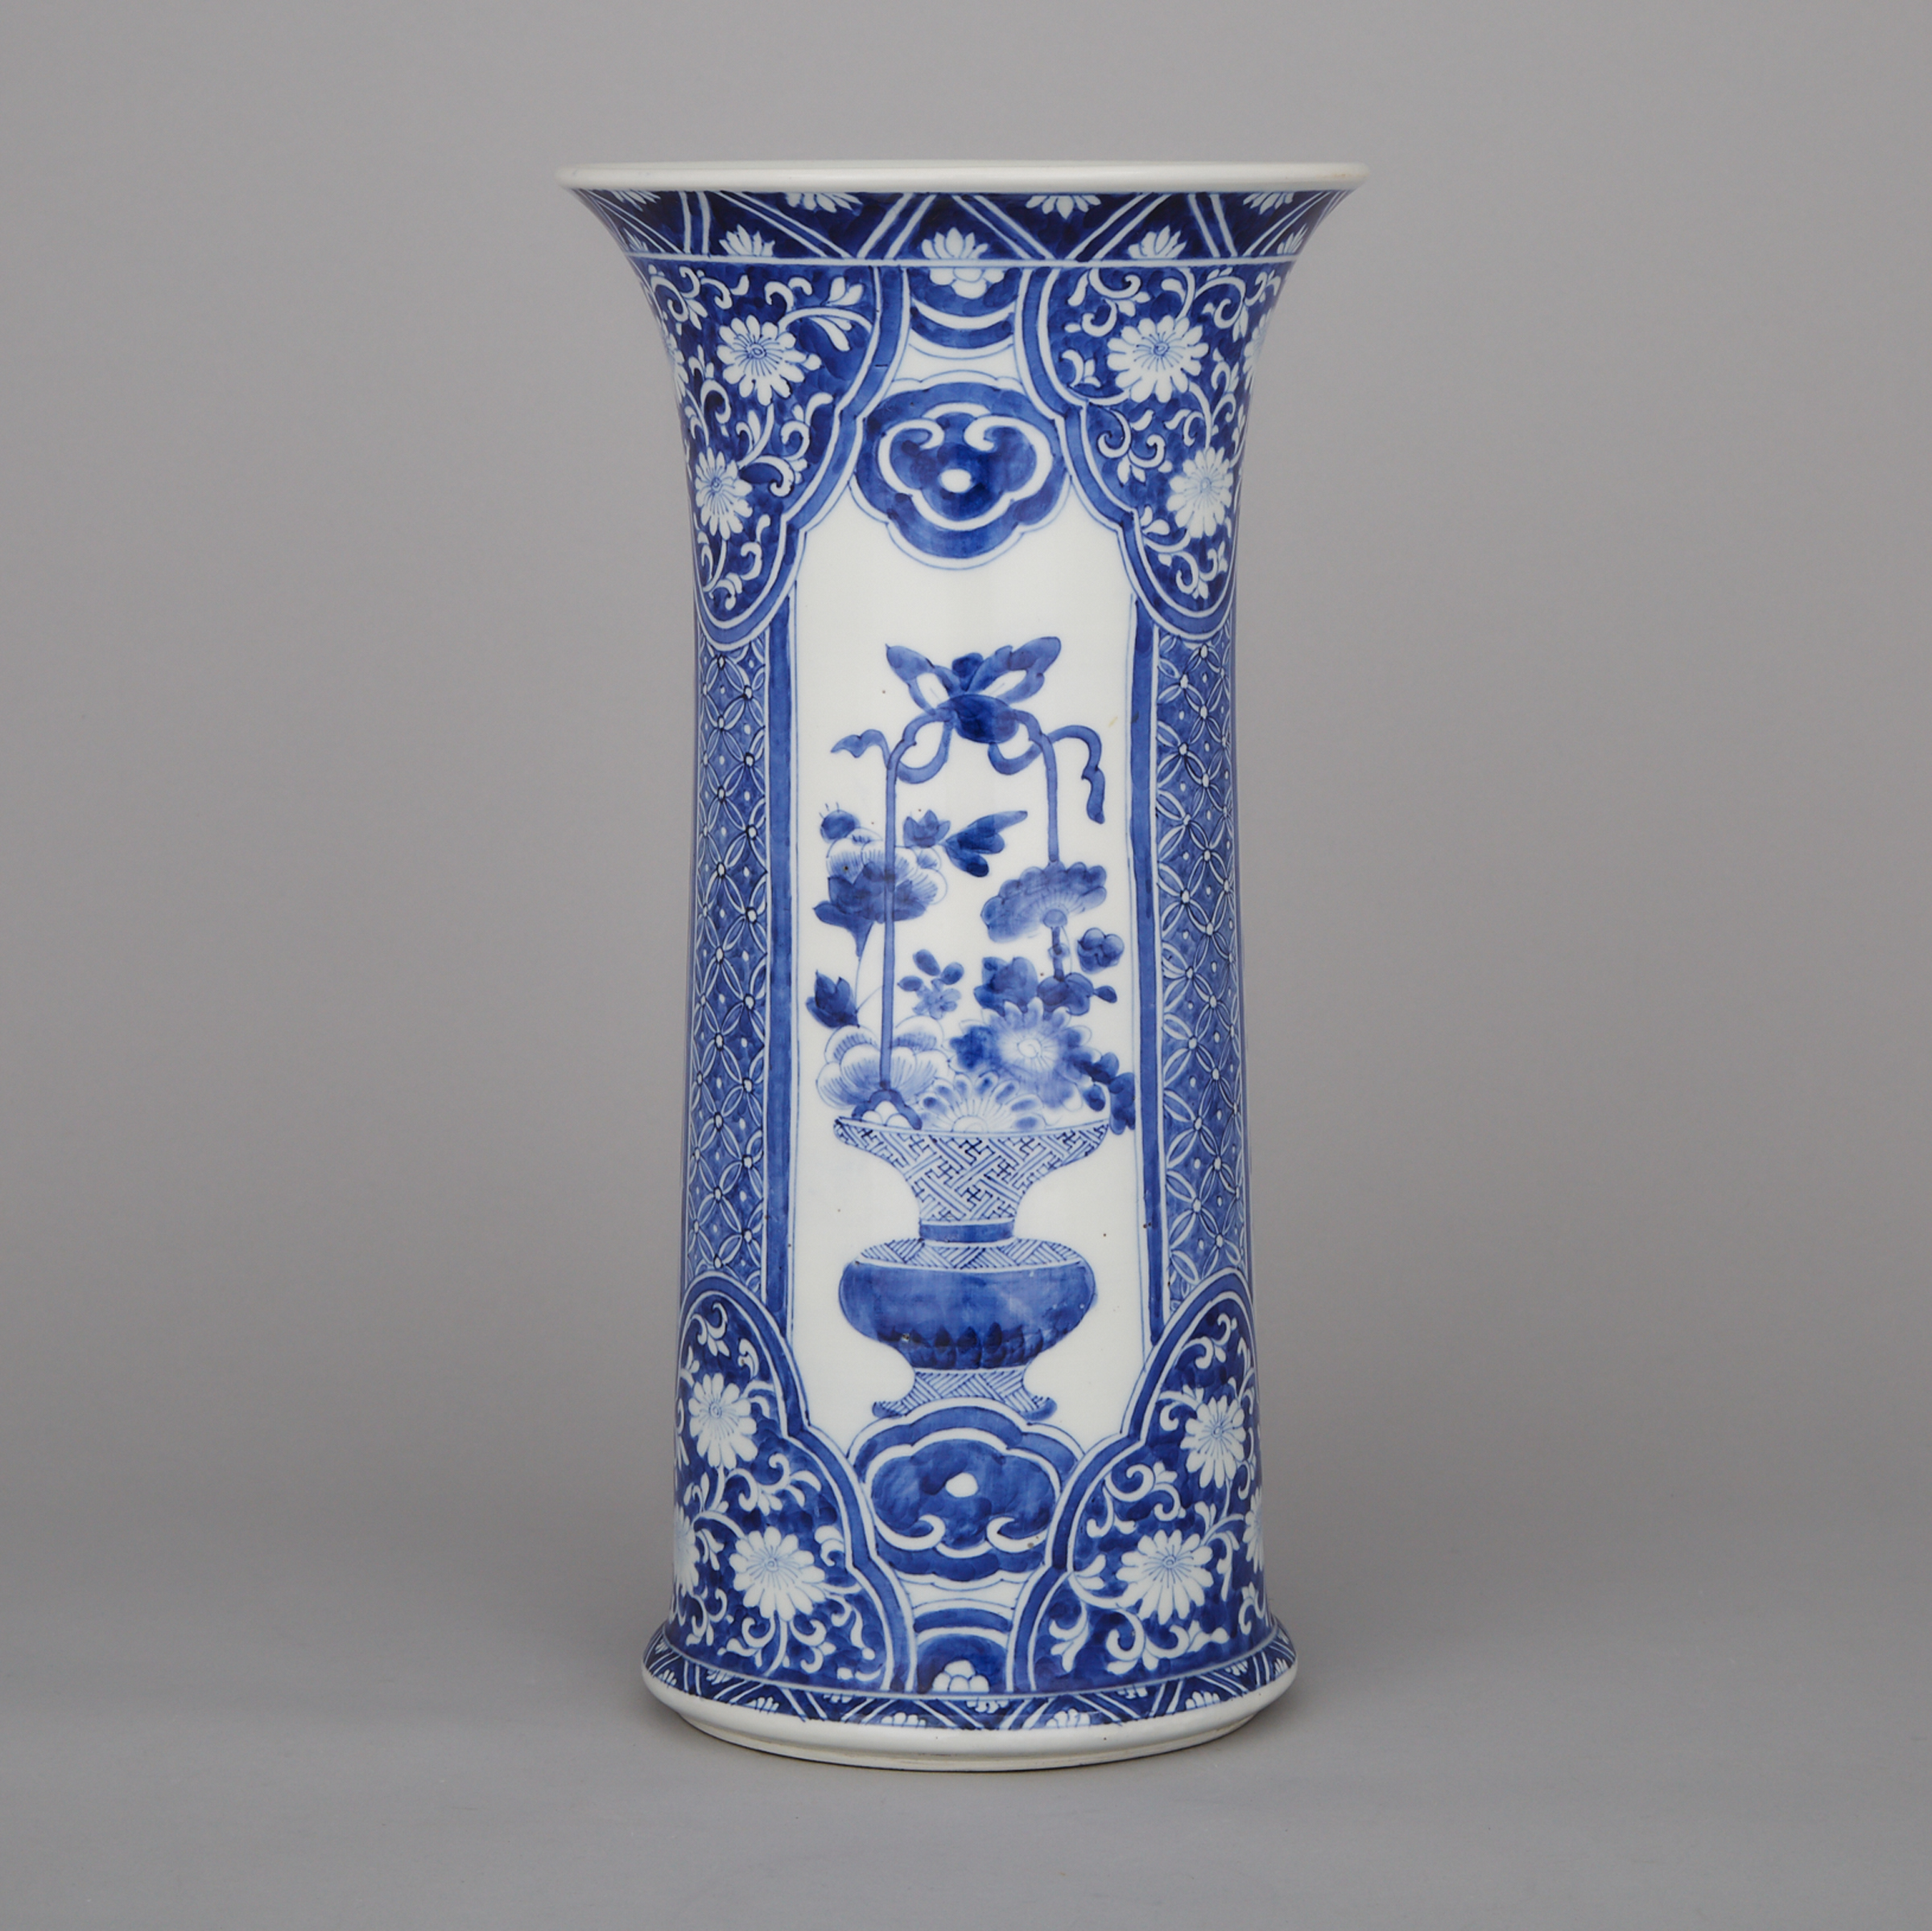 A Kangxi-Style Blue and White Gu Vase, 19th/Early 20th Century